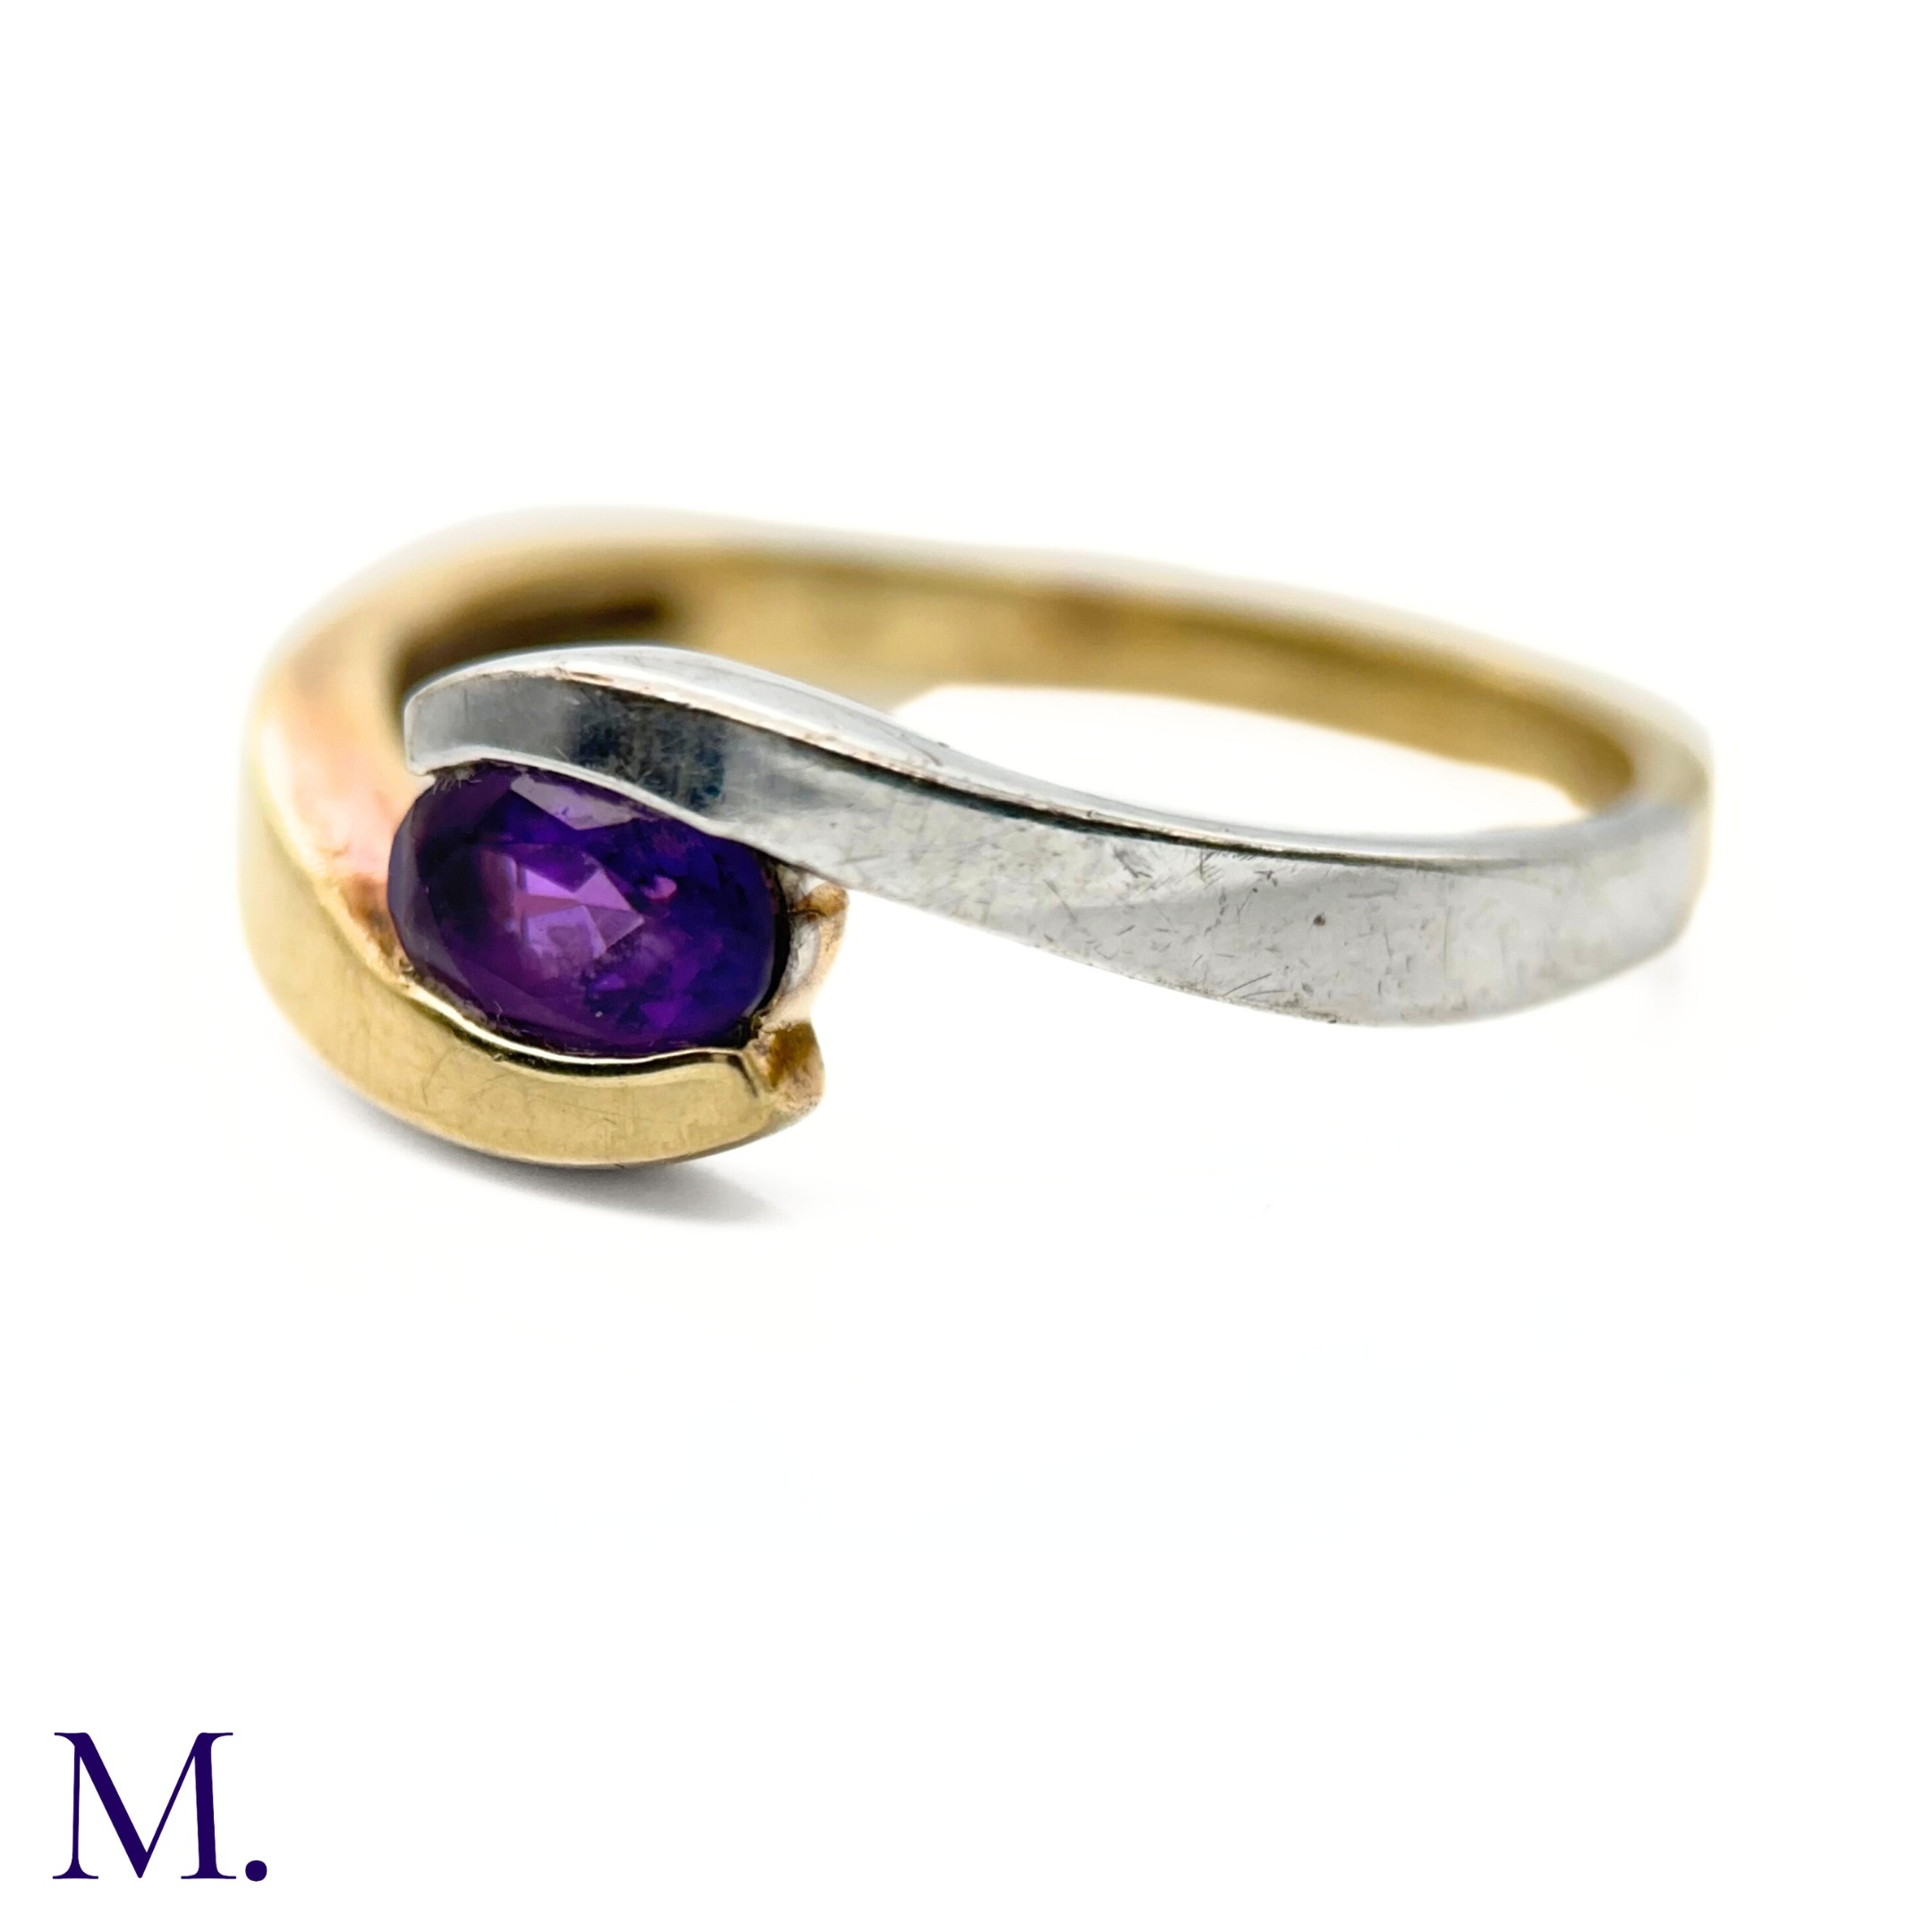 NO RESERVE - A Bi-Colour Gold and Amethyst Ring - Image 2 of 7